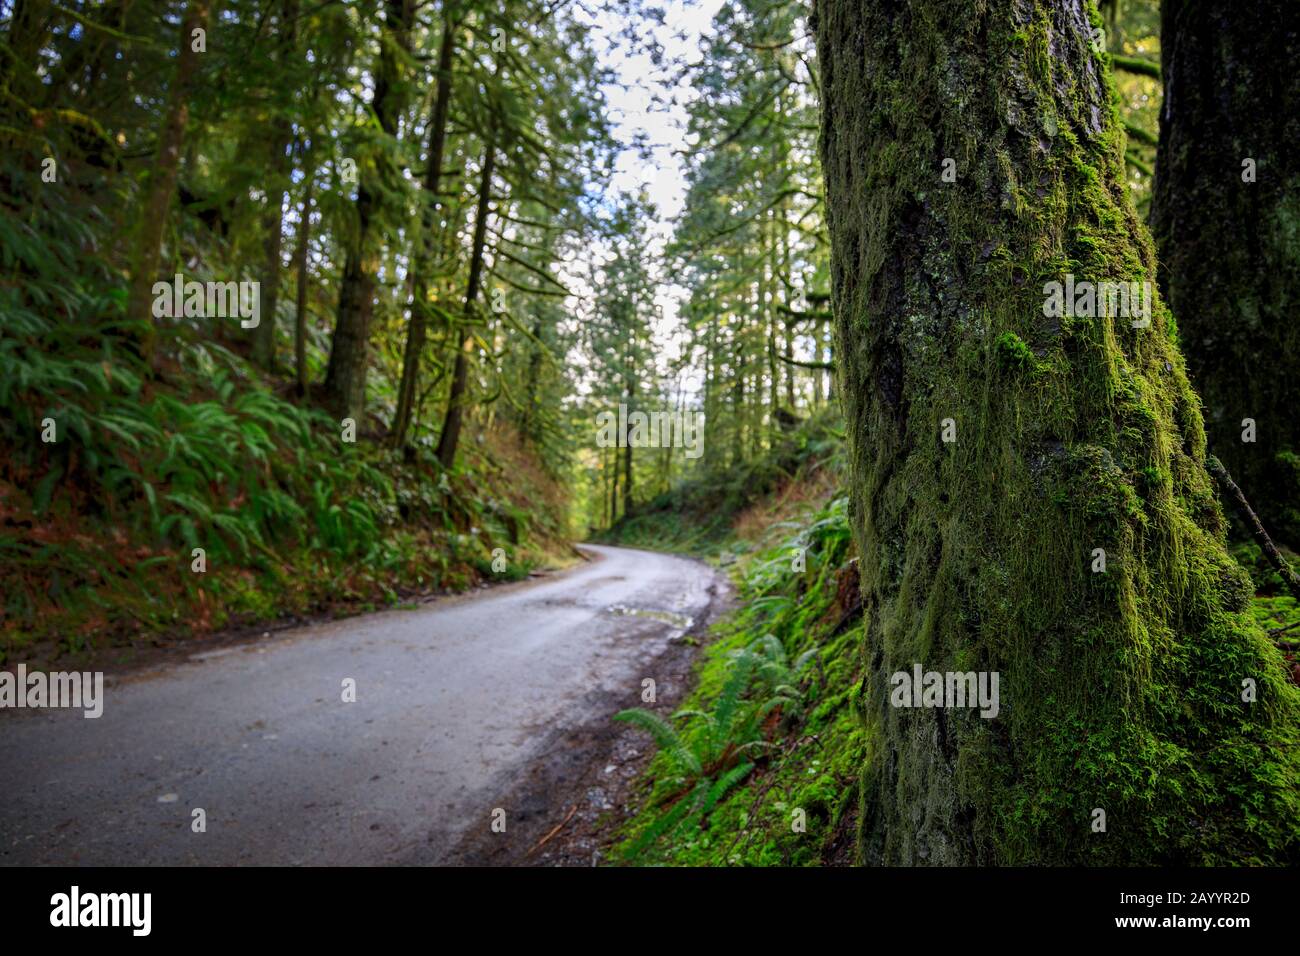 Winding road through old growth forest Stock Photo